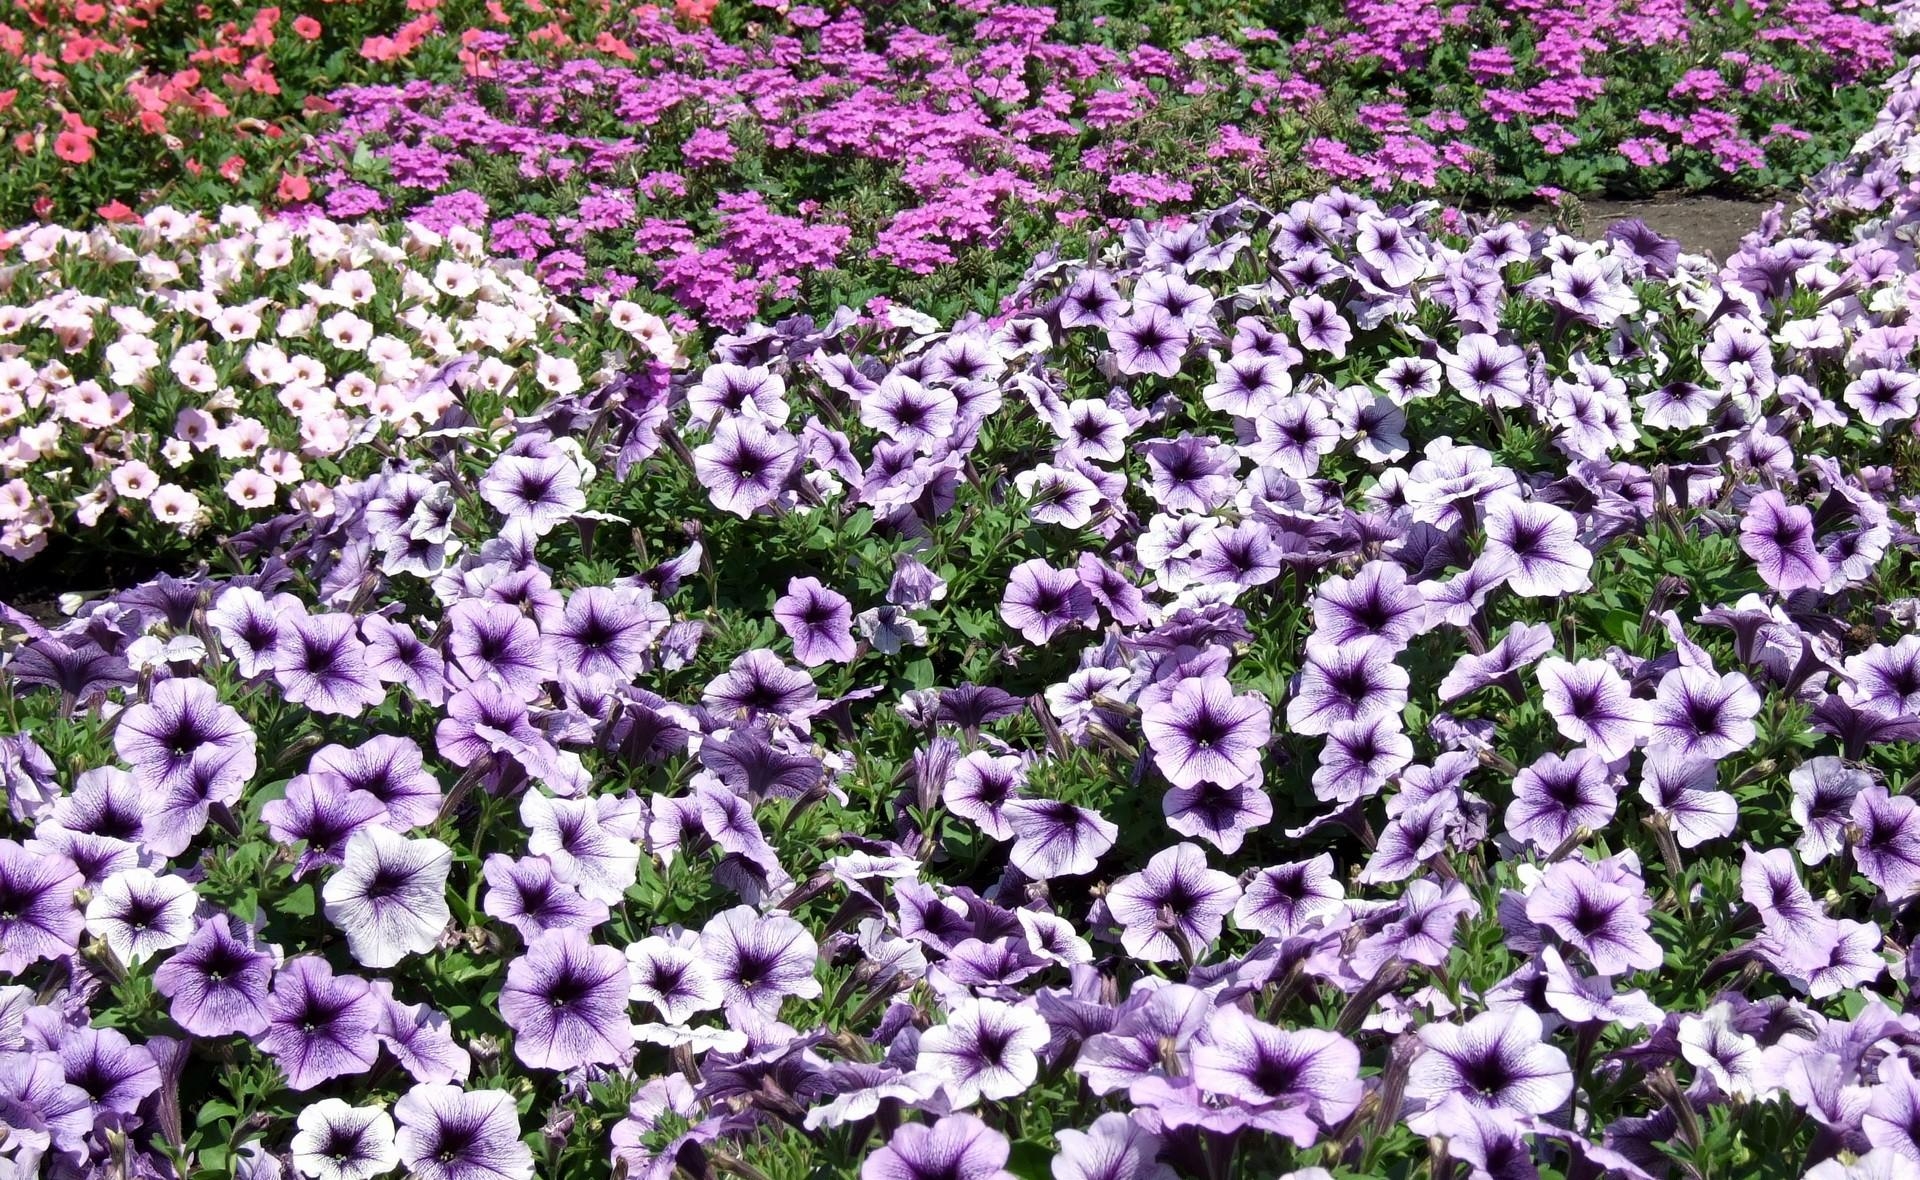 lot, petunia, flowers, bright, flower bed, flowerbed cellphone